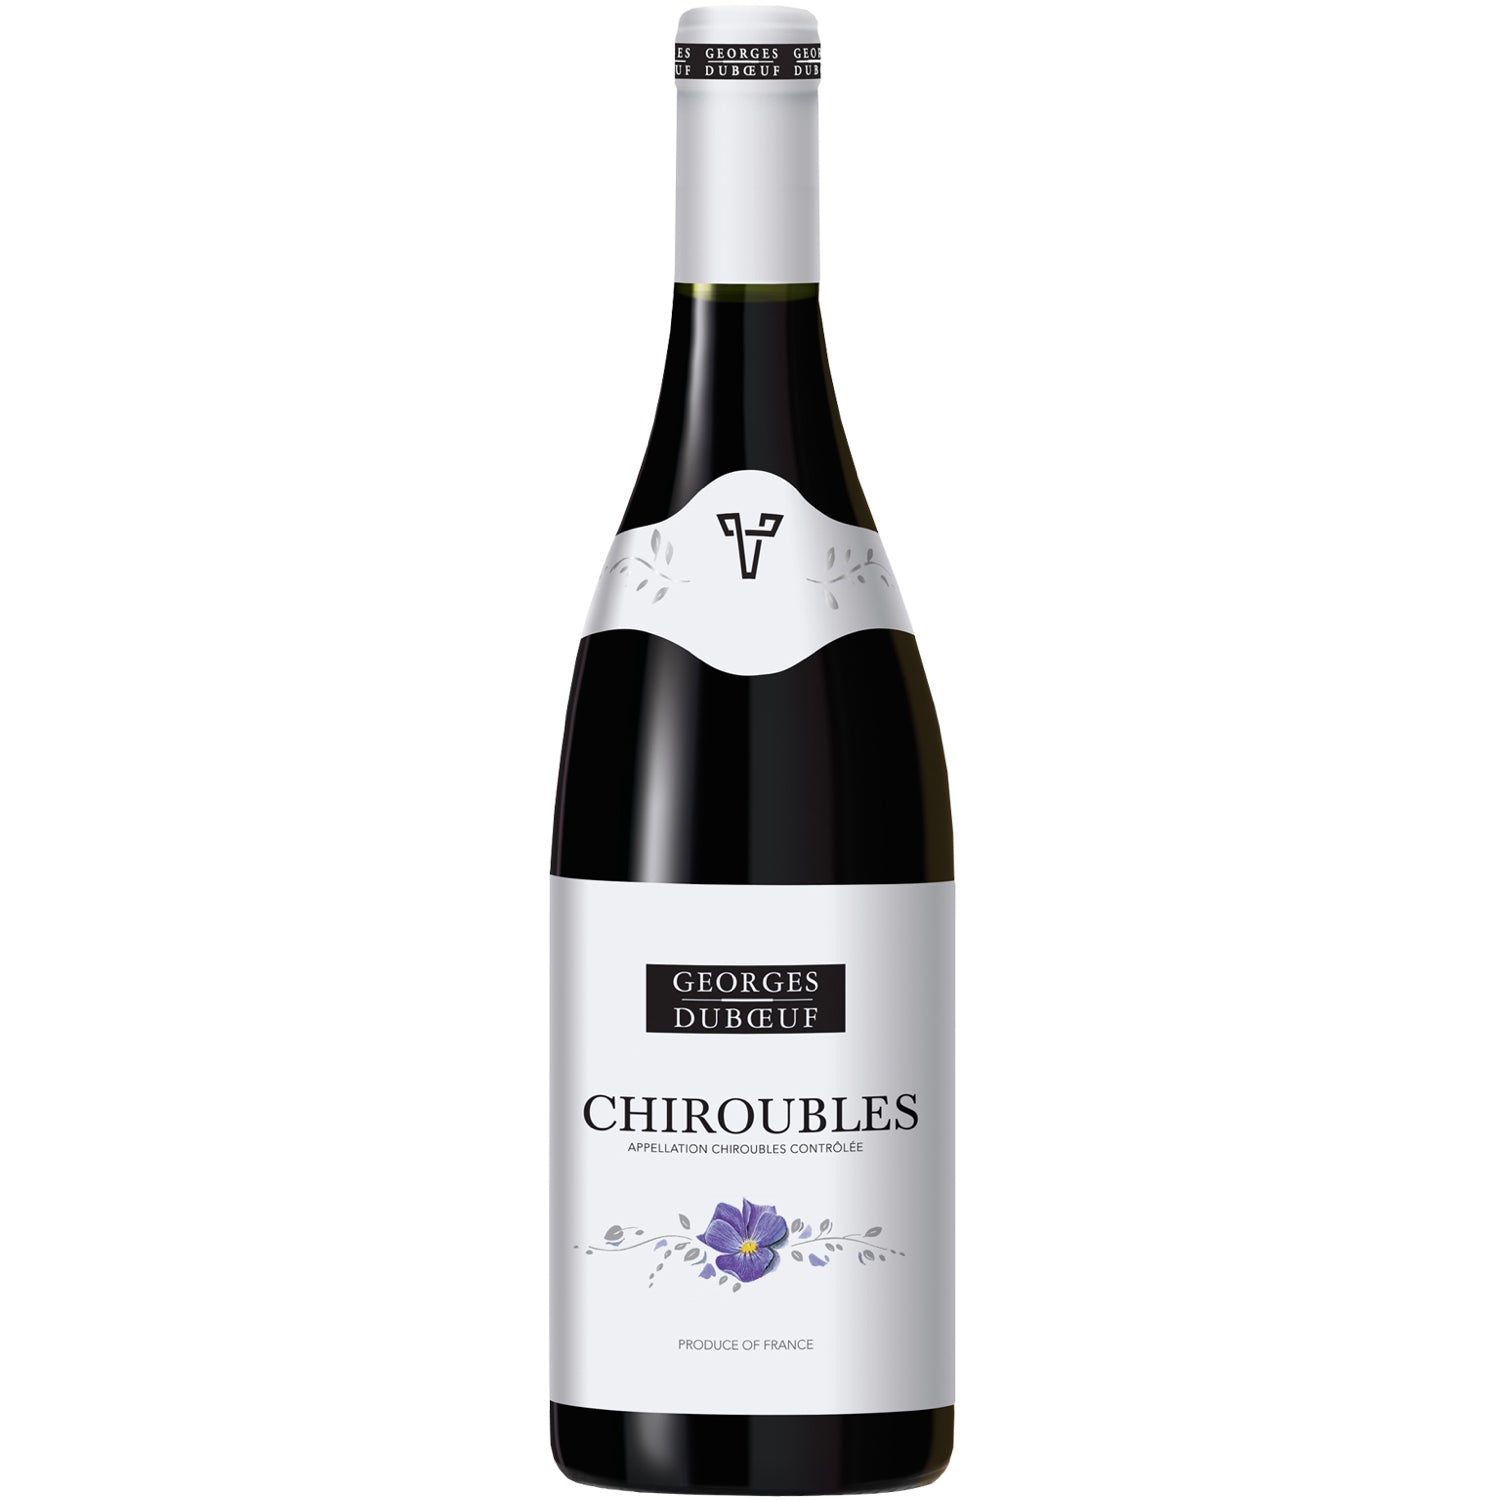 Georges Duboeuf Chiroubles [750ml]